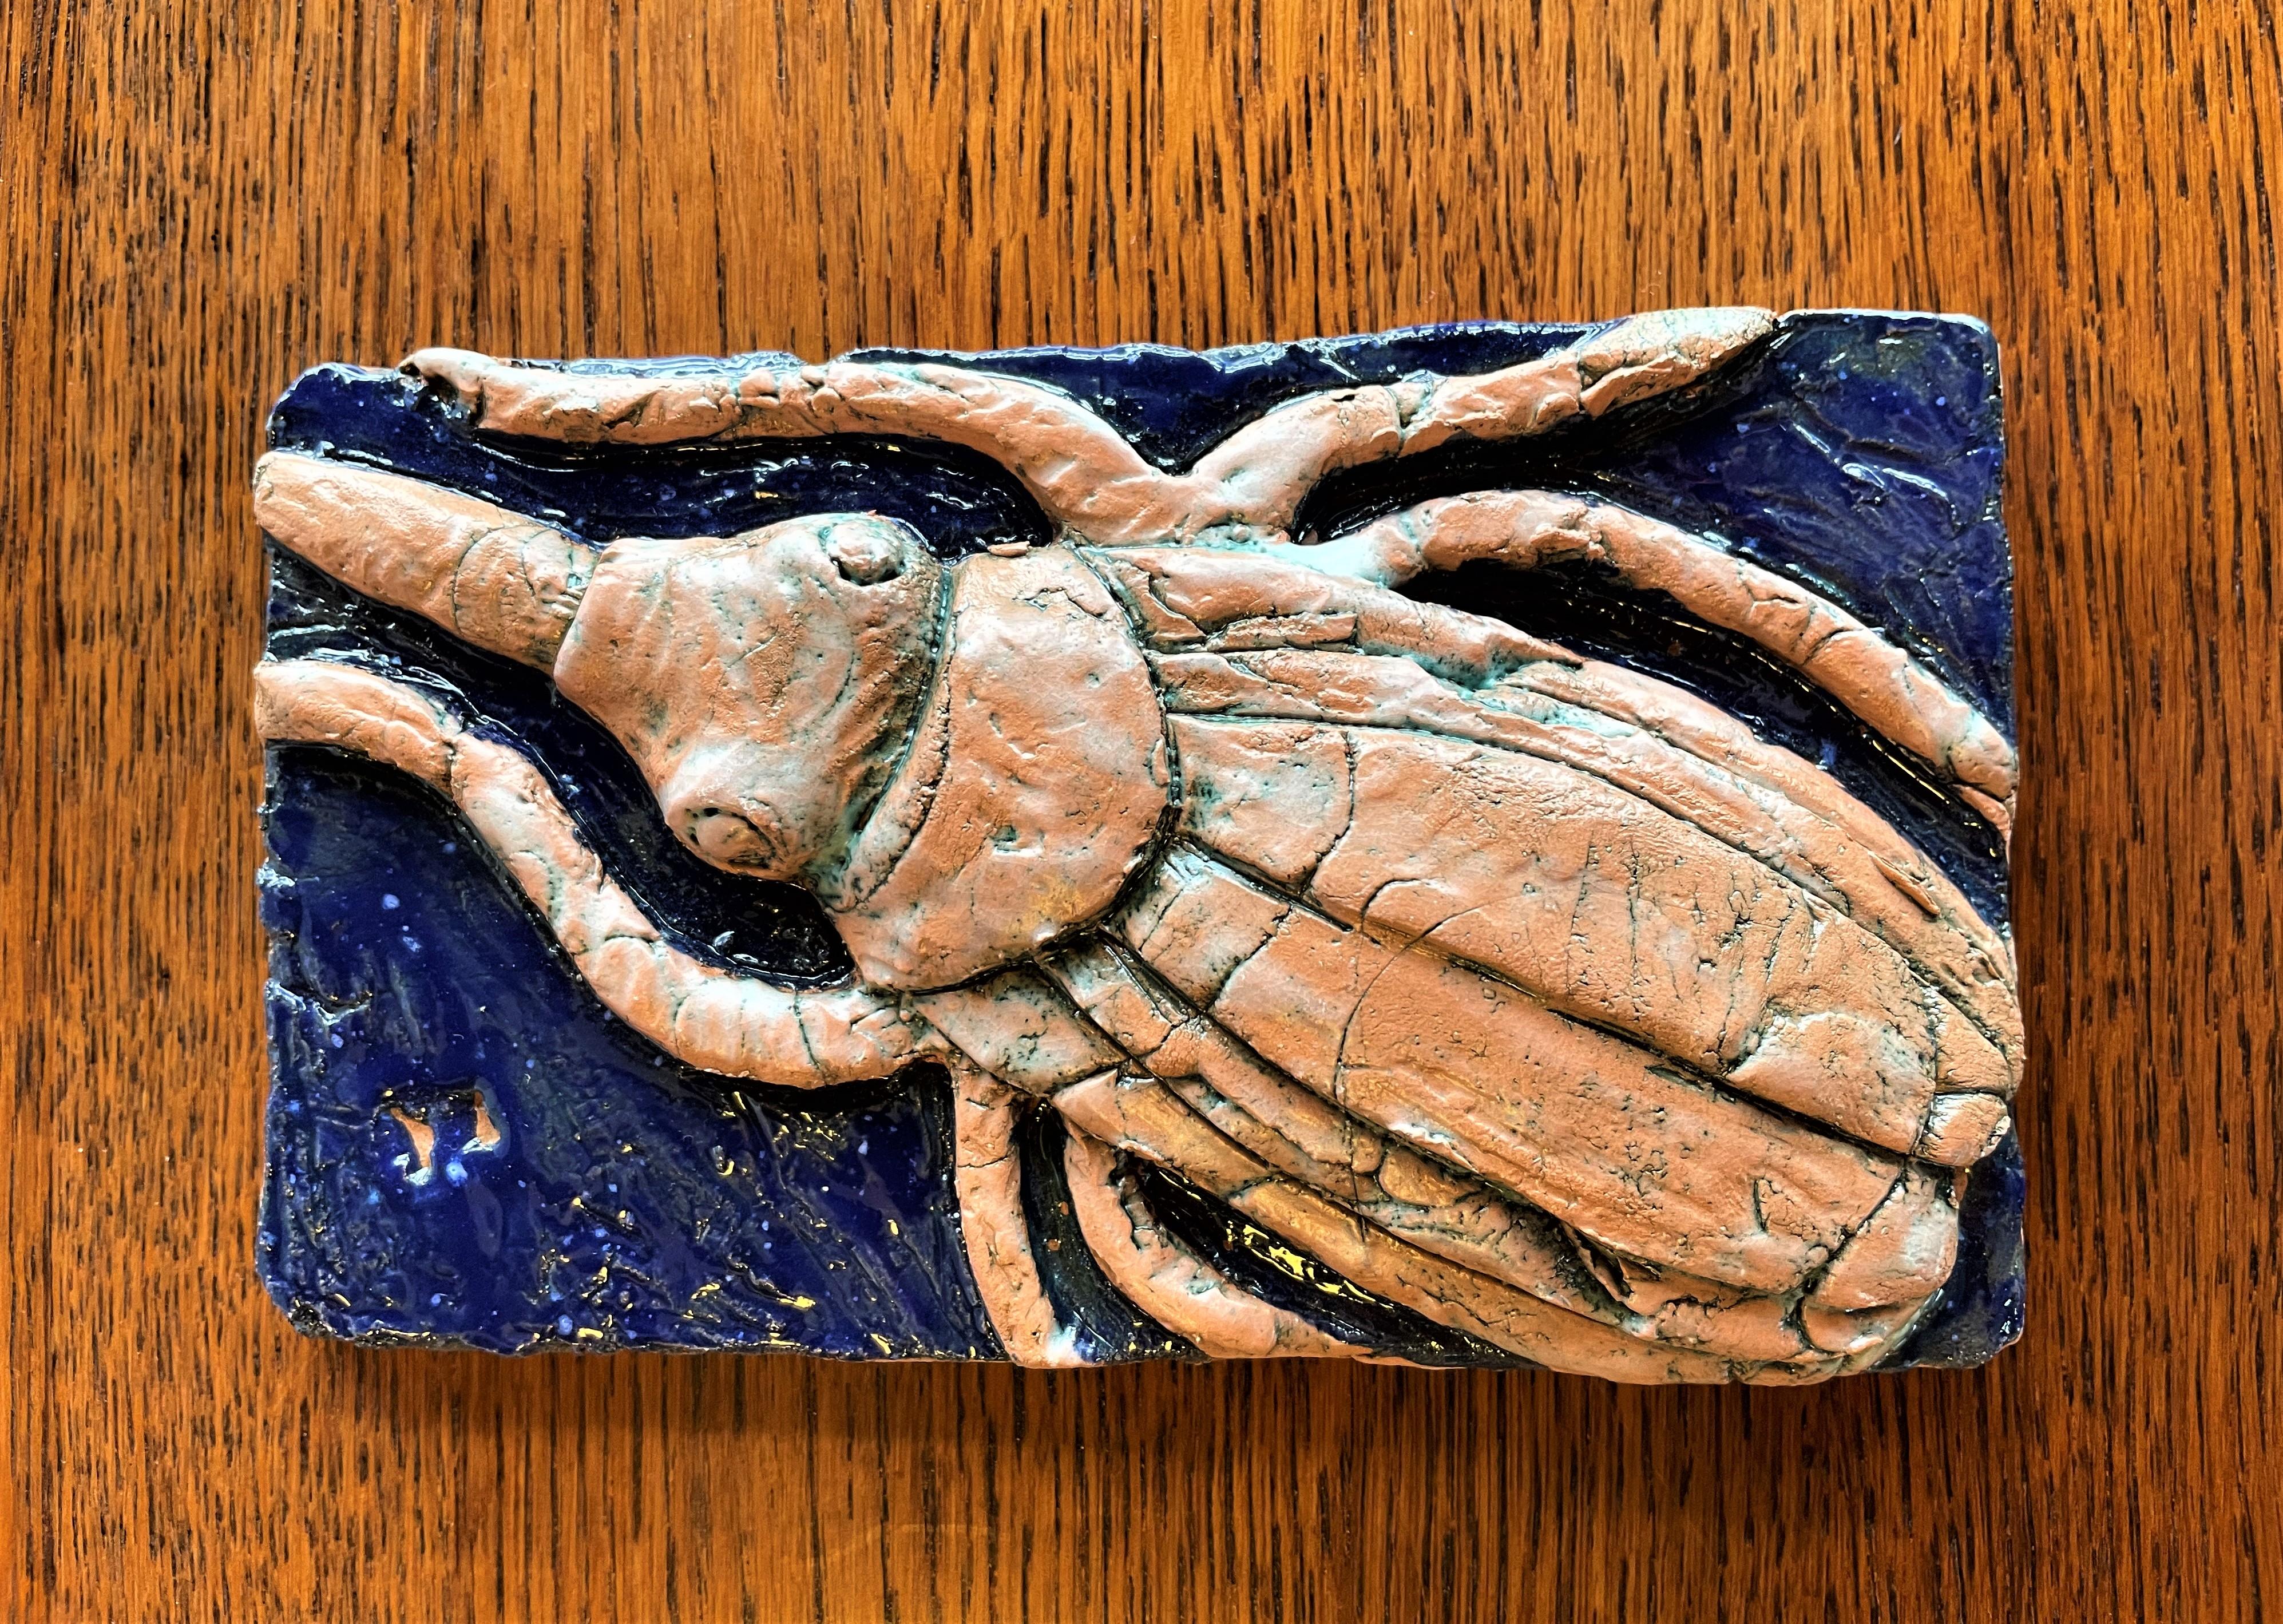 Custom Scarab Wall Tiles: Artist-Crafted and Hand Glazed Ceramic - Set of 3 In Excellent Condition For Sale In Austin, TX